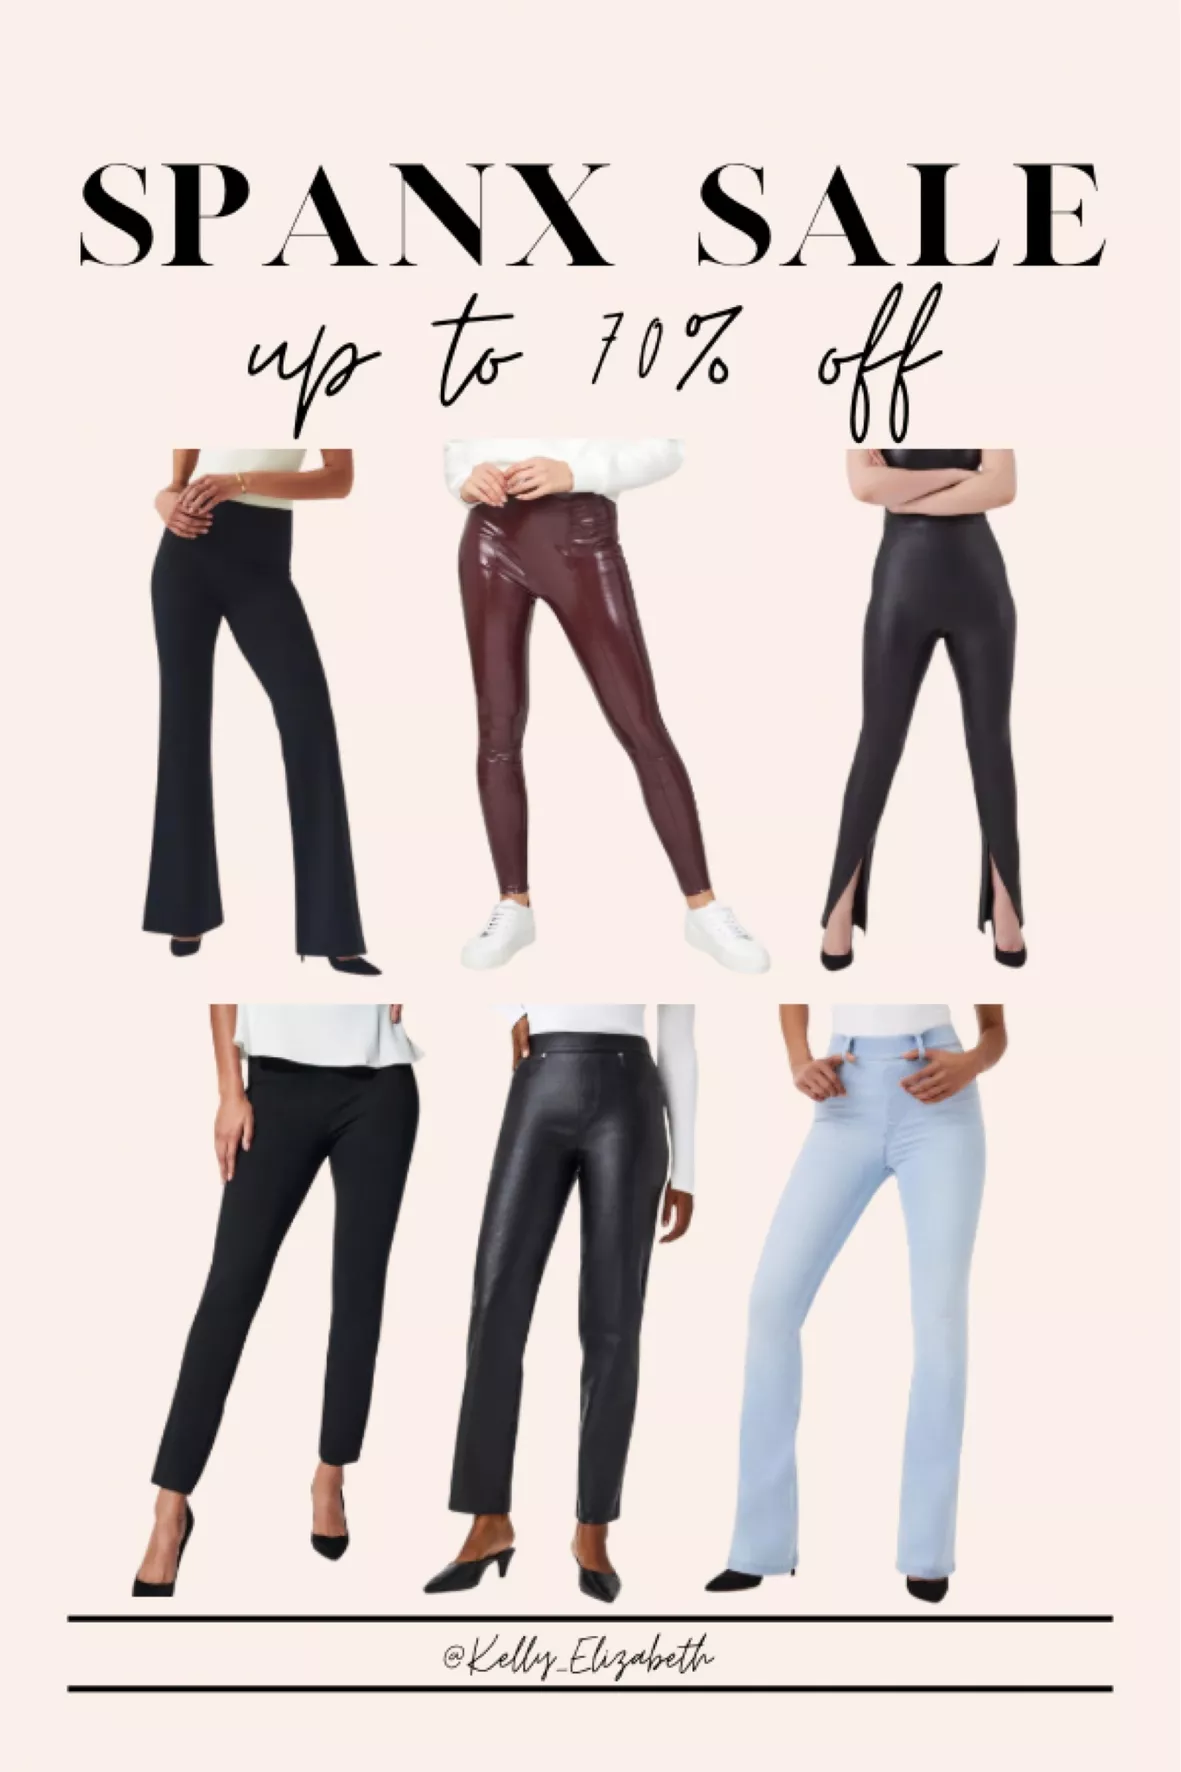 Spanx Straight-leg pants for Women, Online Sale up to 70% off